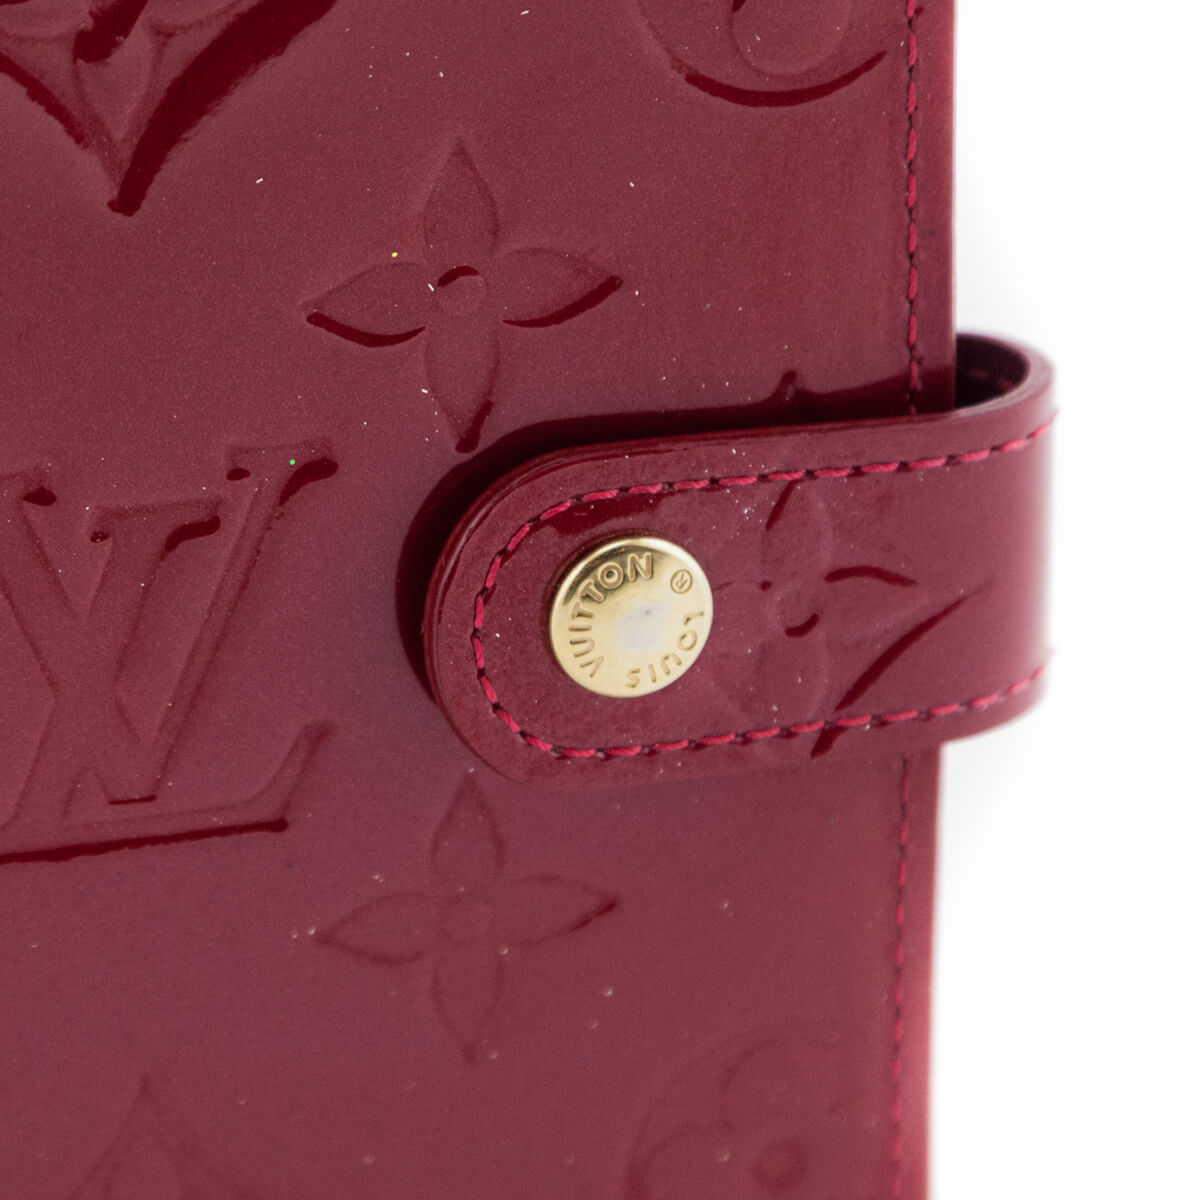 Louis Vuitton Monogram Vernis Small Ring Agenda Cover - Red Books,  Stationery & Pens, Decor & Accessories - LOU795138